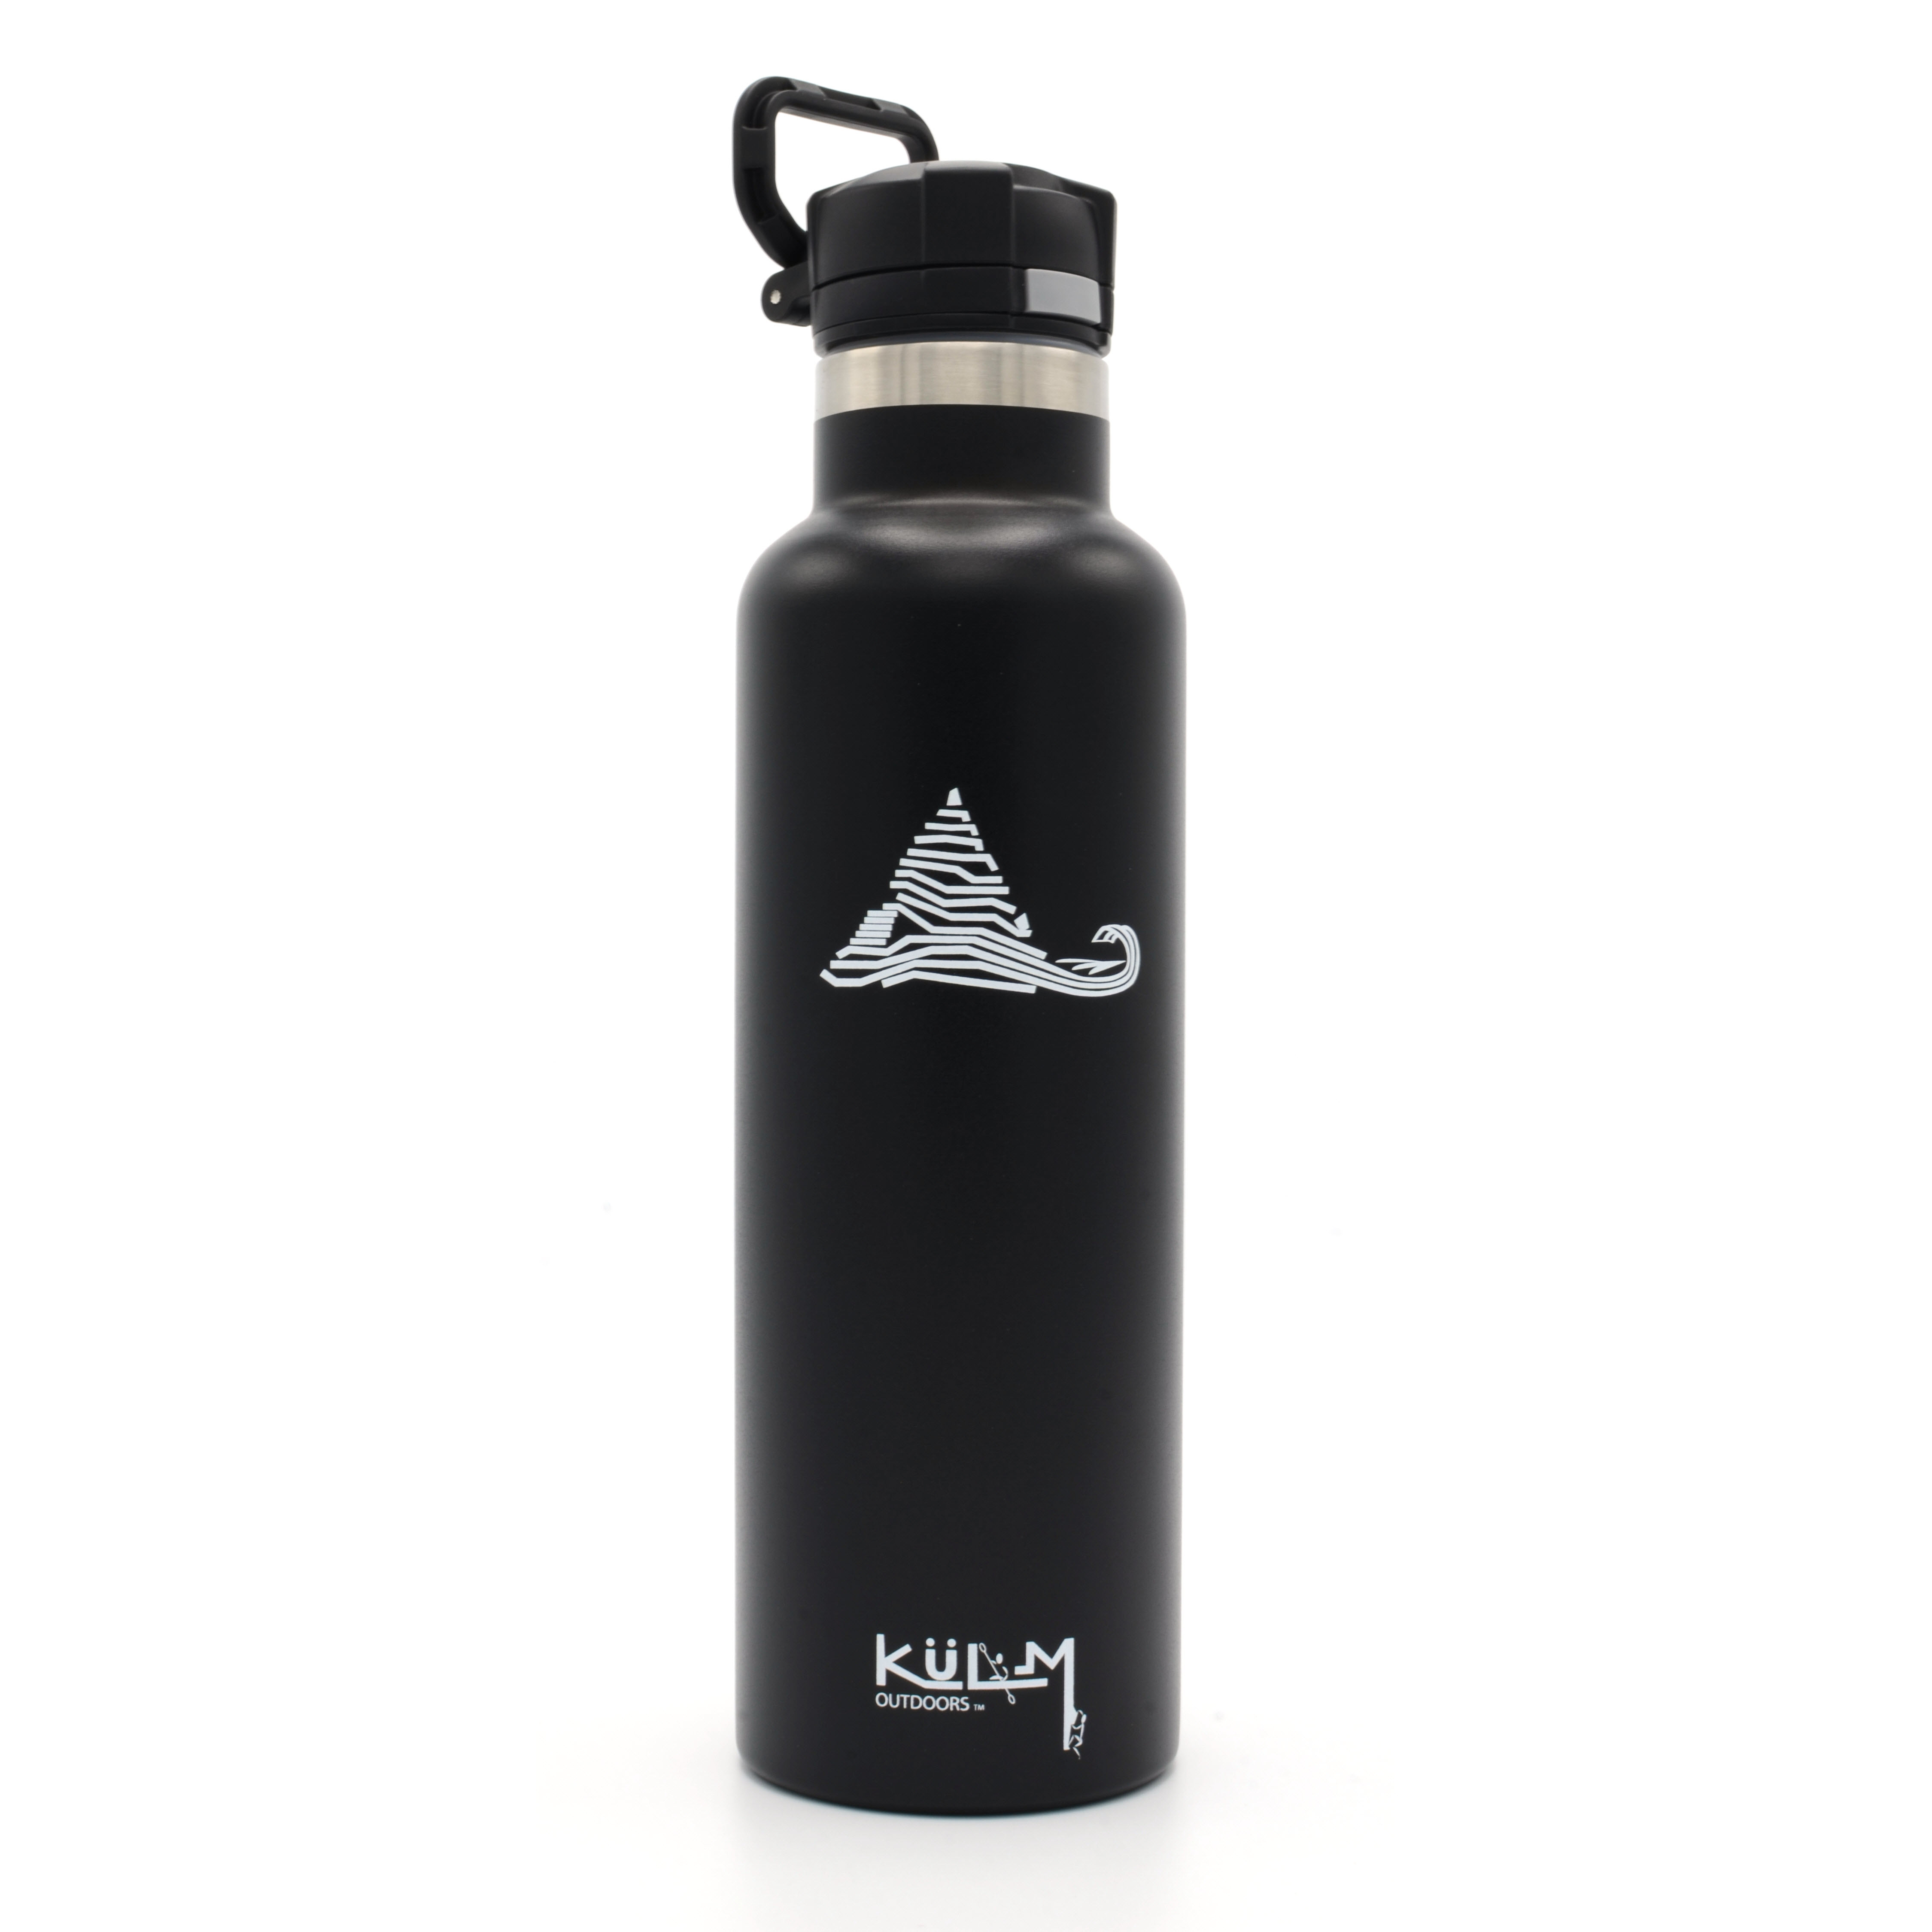 Black KuLM Outdoors Cup-Holder Friendly 20oz Vacuum Insulated Water Bottle with Flip Spout Lid